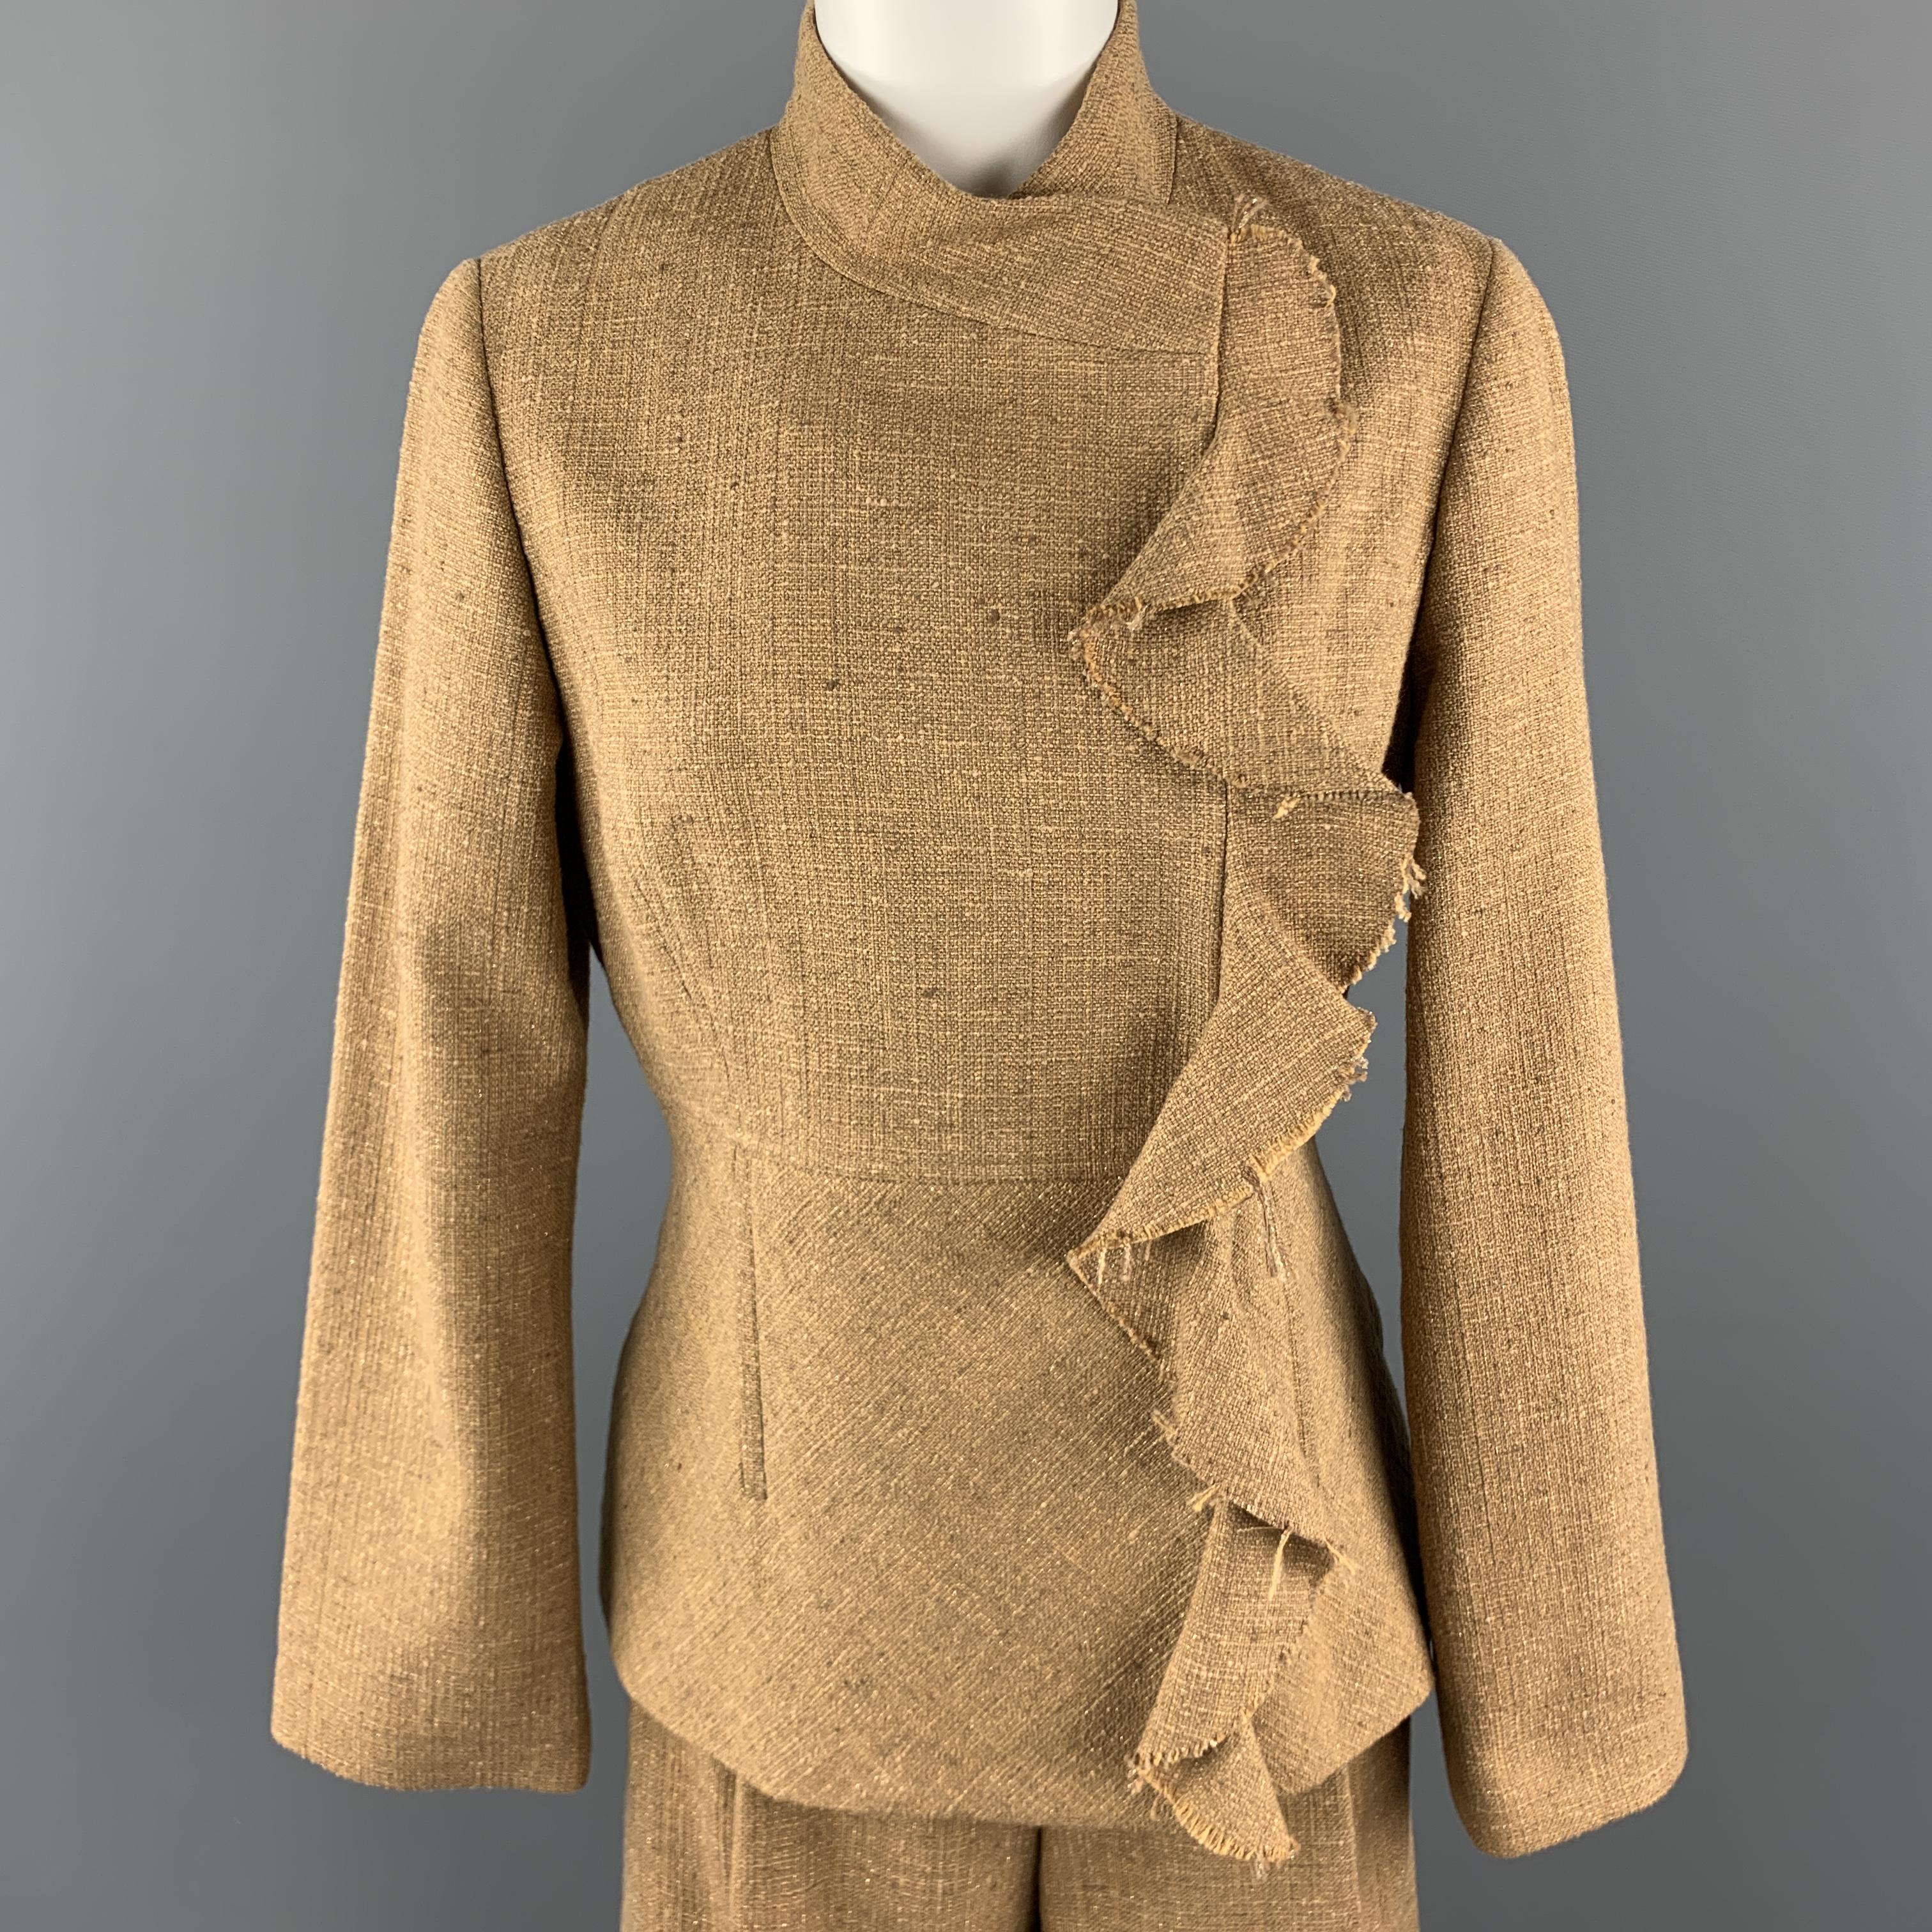 LELA ROSE Pants Set comes in tan and gold tones in a wool blend textured material, and includes a high collar ruffled double breasted Jacket, and a wide leg pleated buttoned pants. Made in USA.

Excellent Pre-Owned Condition.
Marked: